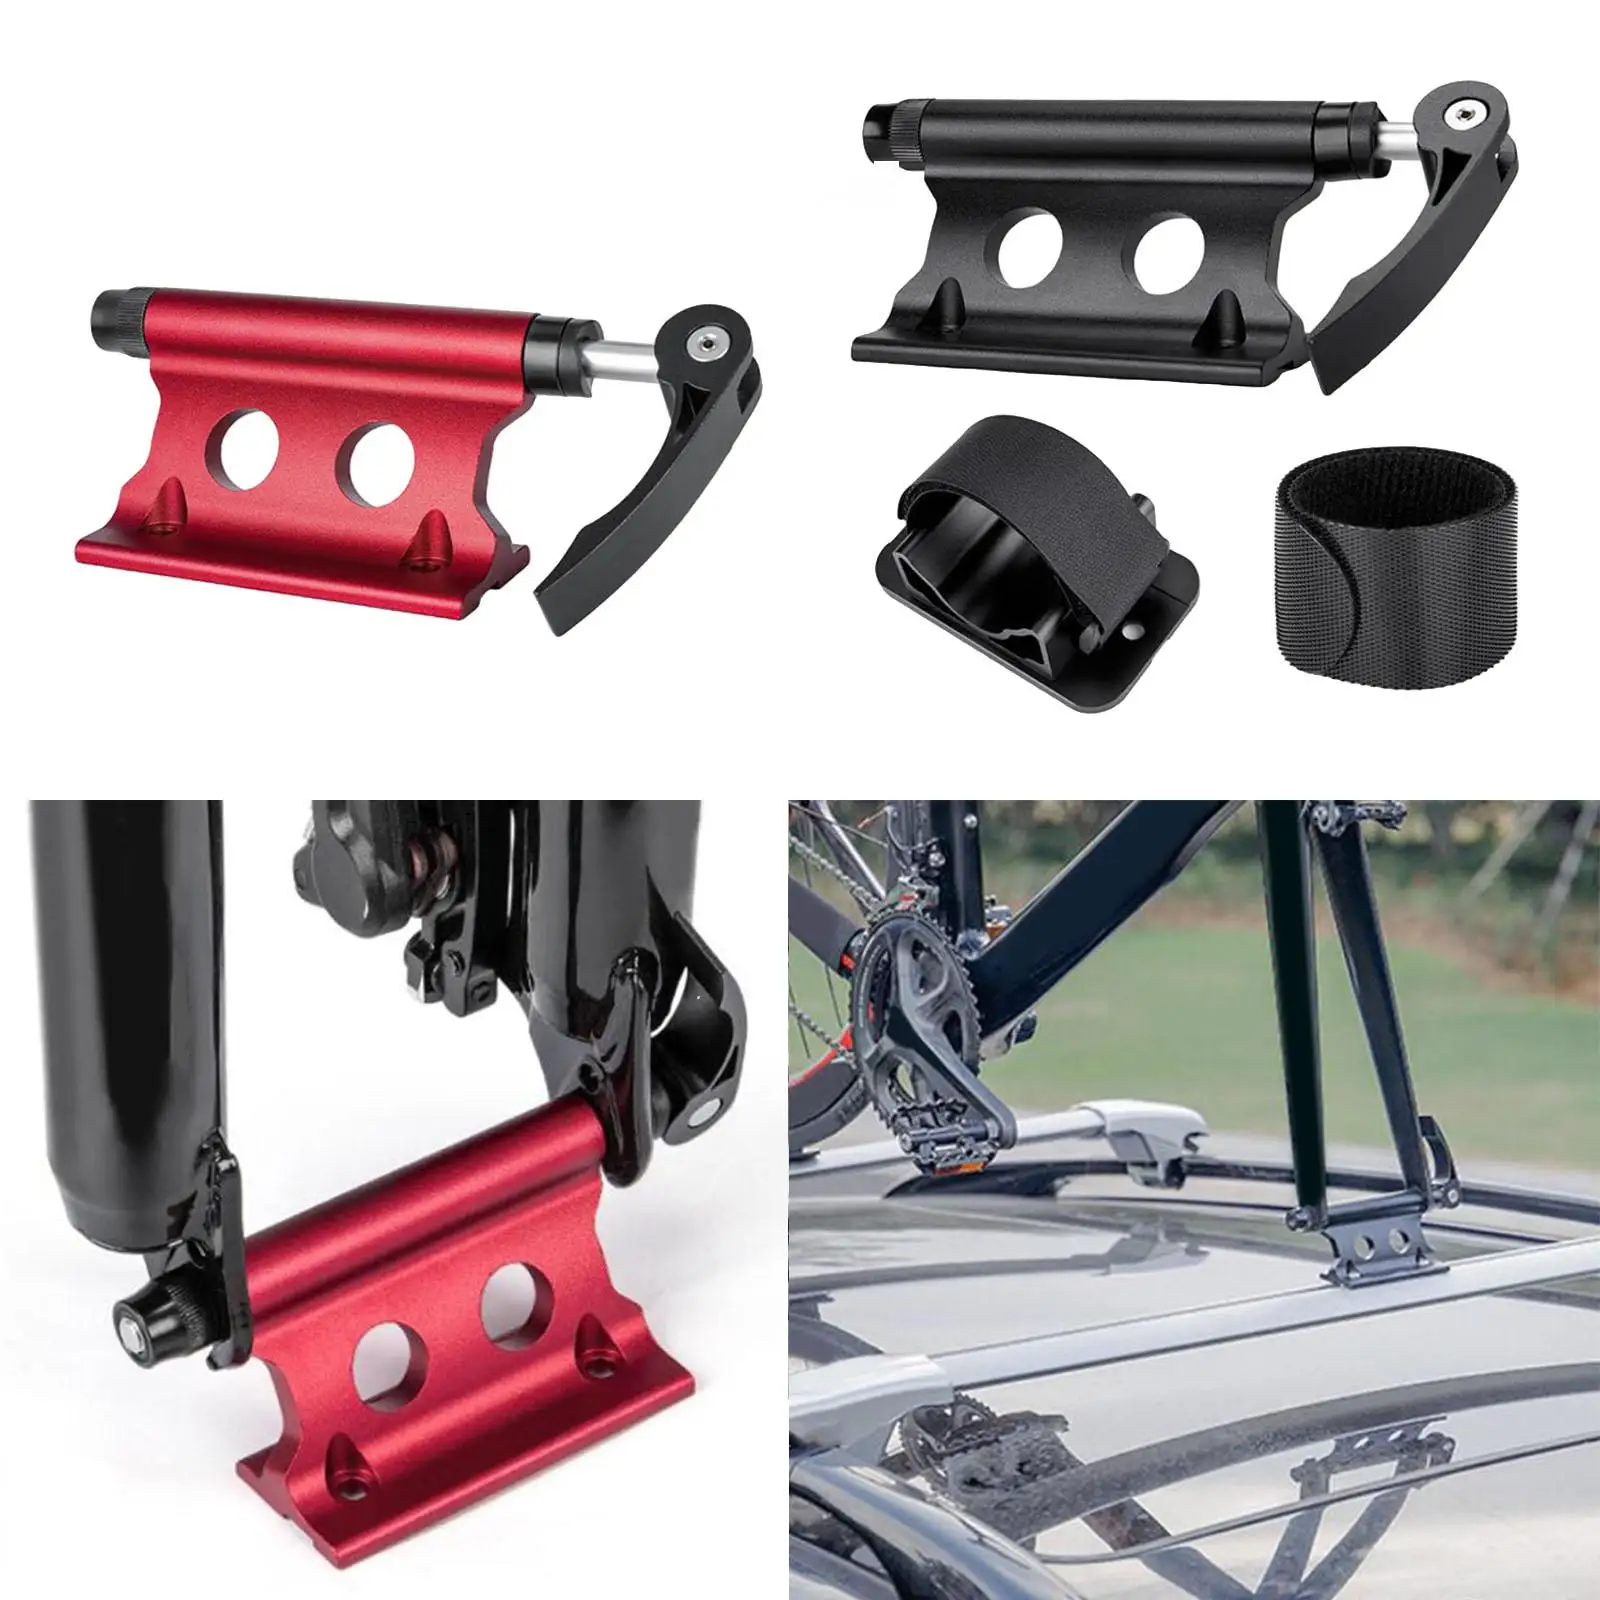 Bicycle Front Fork Quick Release Mount Holder Universal Aluminum Alloy Bike Block Fork Lock Cycle Transport Storage Mount Lock